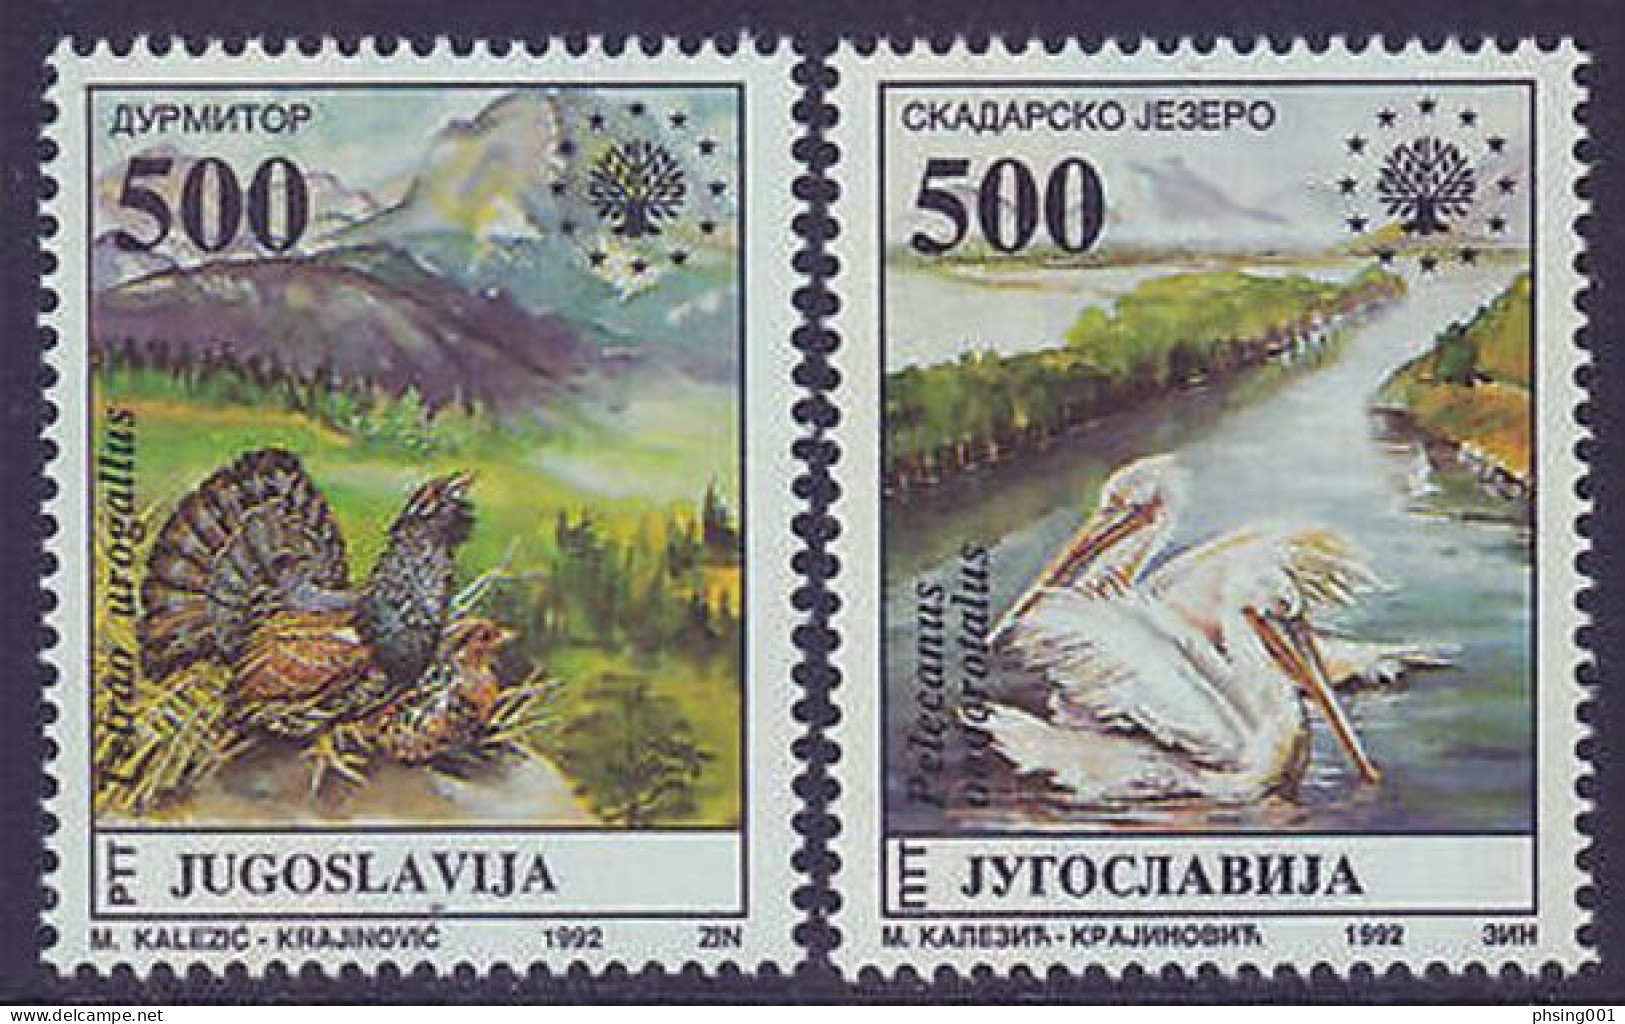 Yugoslavia 1992 Europa CEPT Columbus Olympic Games Barcelona Soccer Fauna Cats Pelicans Trains, Complete Year MNH